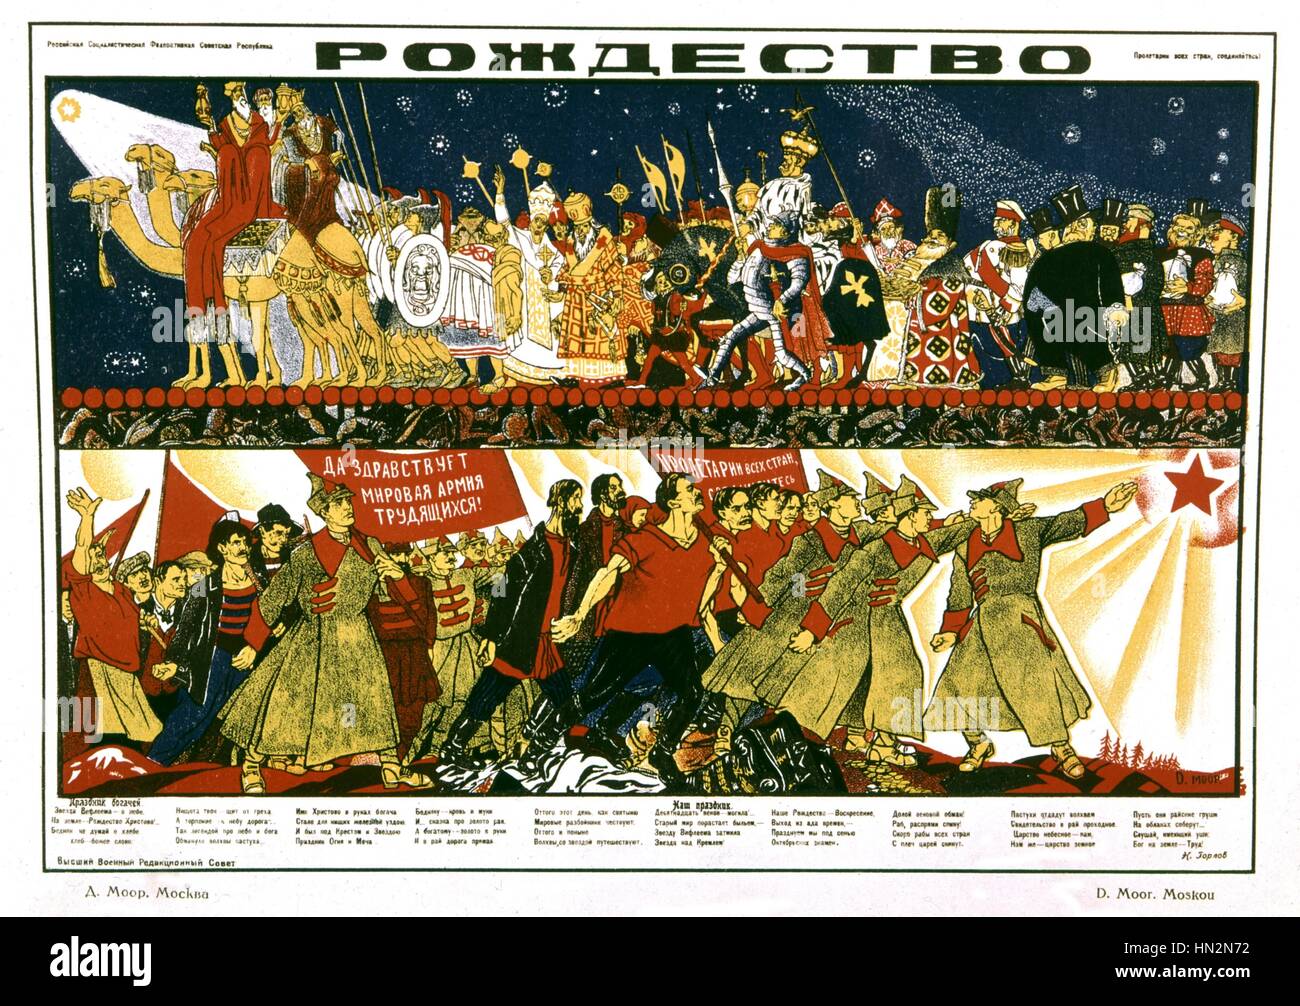 Propaganda poster: 'Long live the workers' pacific army', D. Moor The revolutionary forces making for the red star (revolution symbol) while the Ancient Man follows the Bethlehem star 20th century USSR Stock Photo